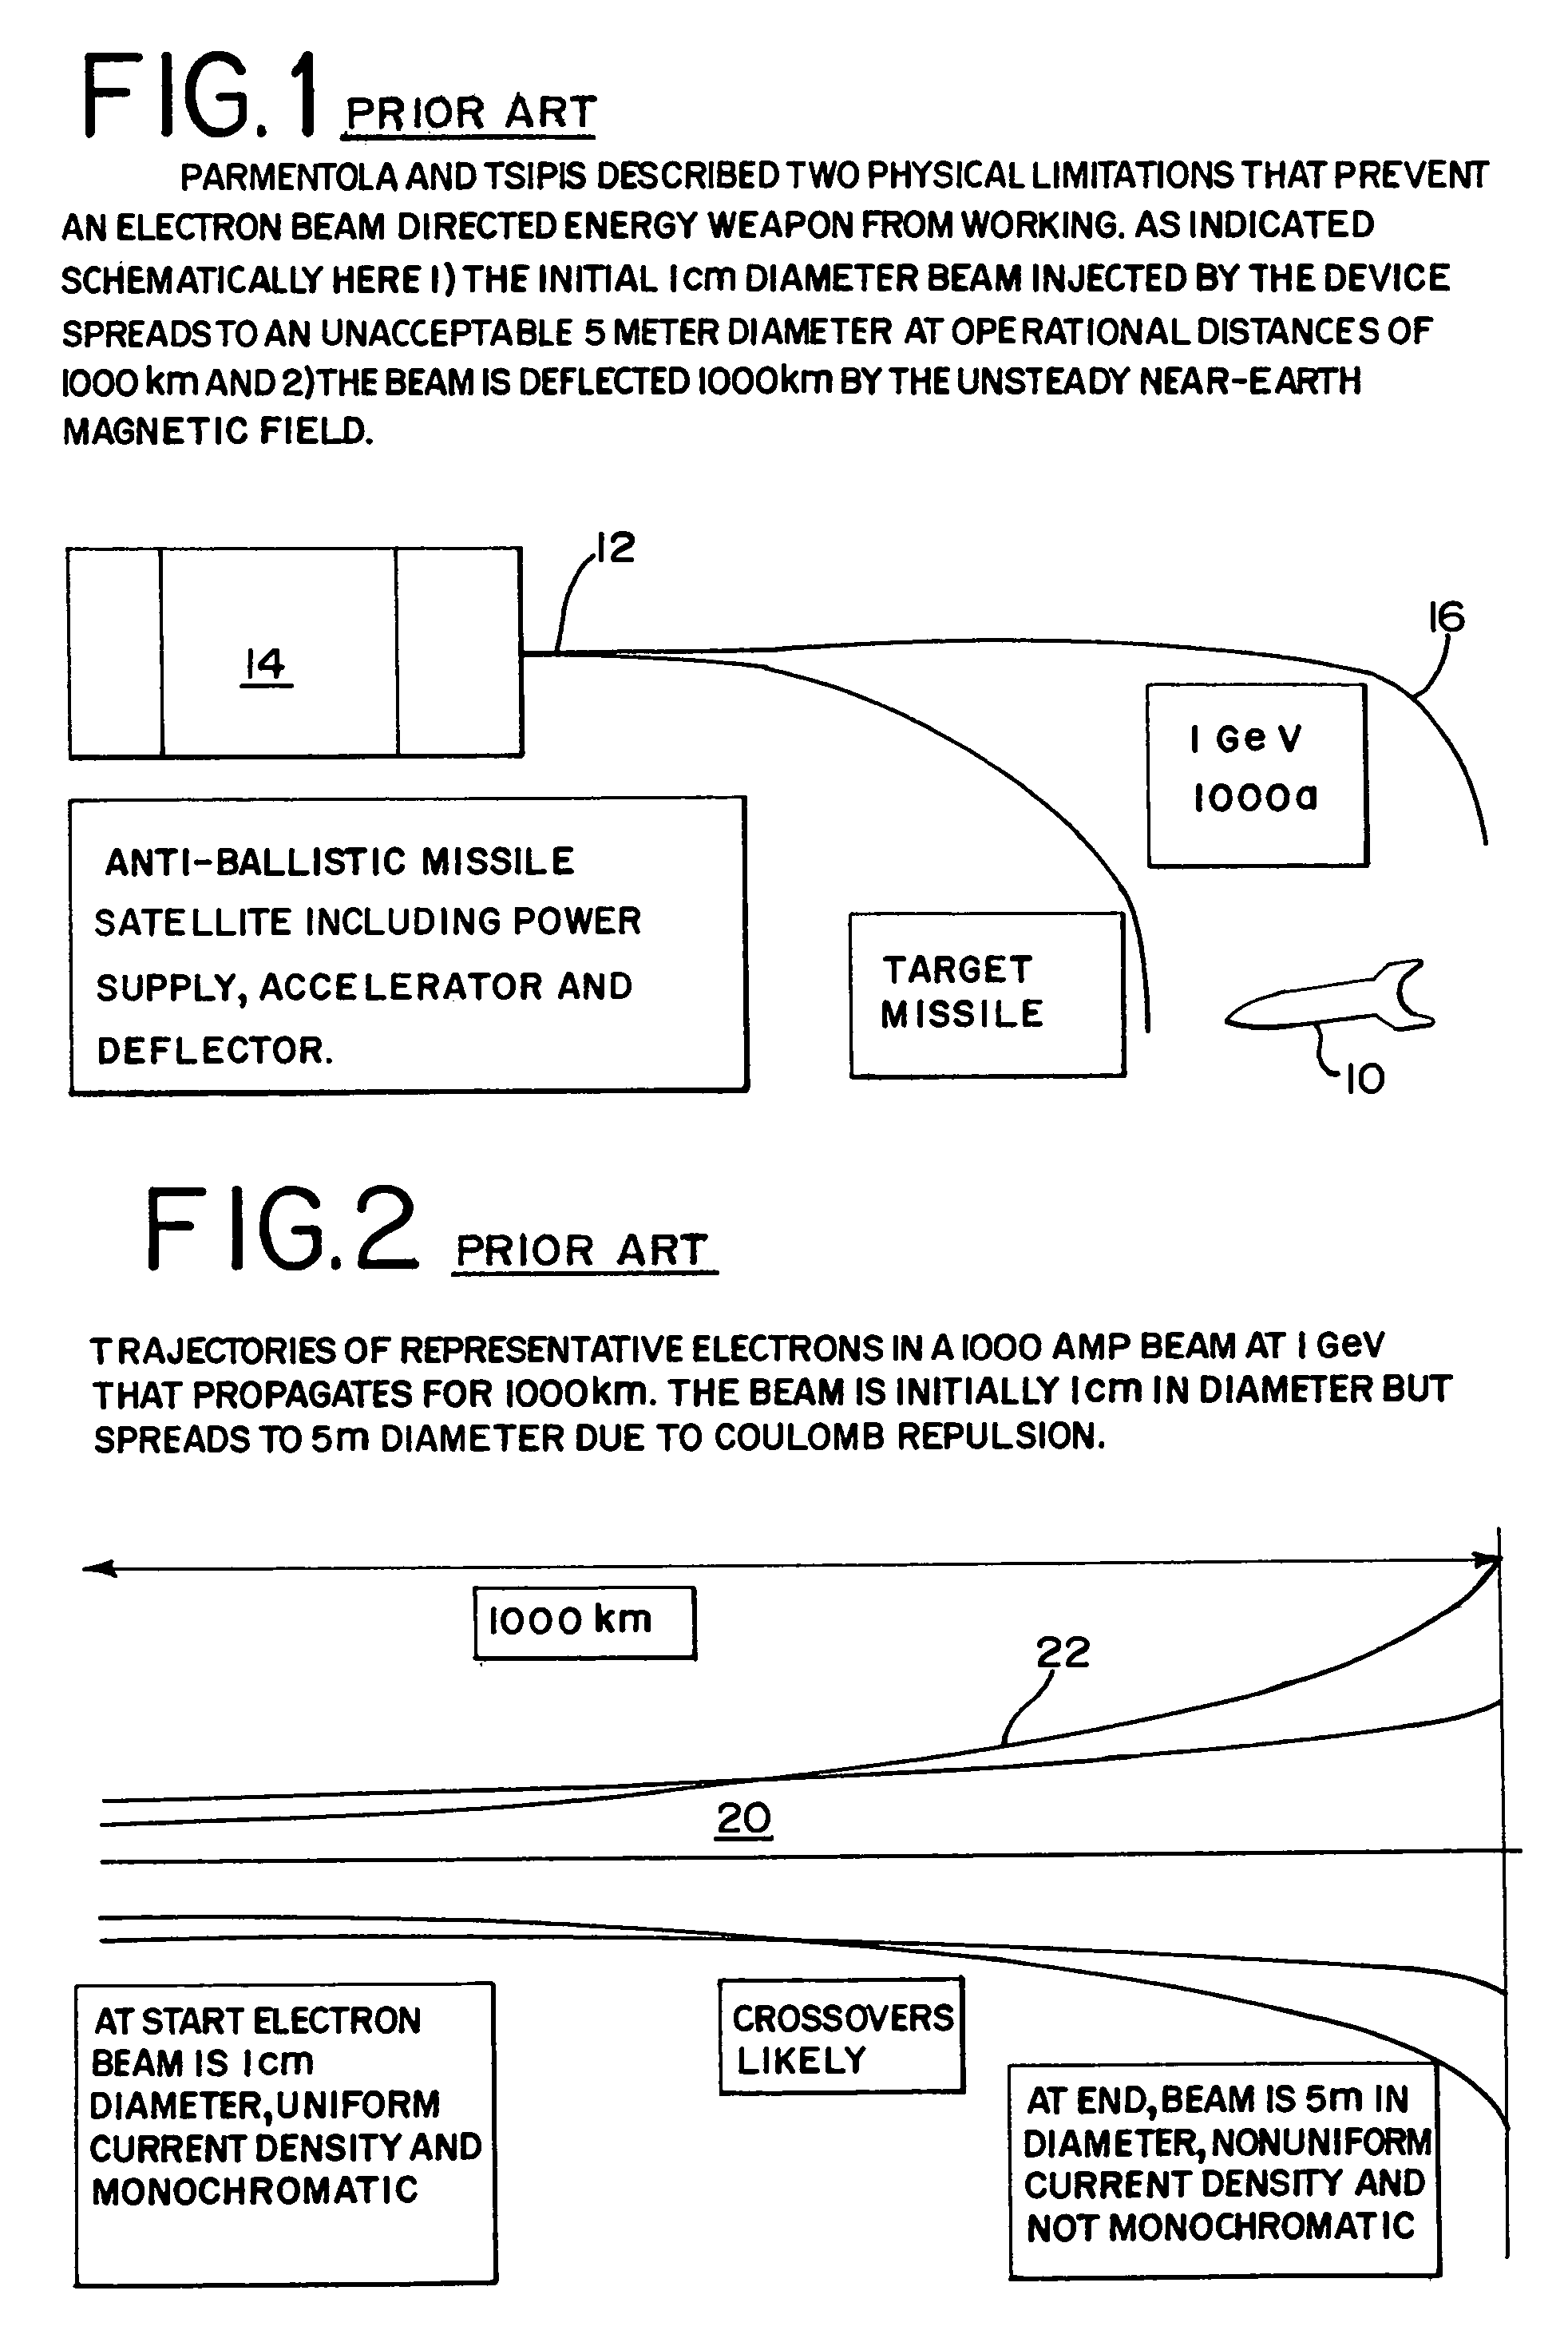 Electron beam directed energy device and methods of using same